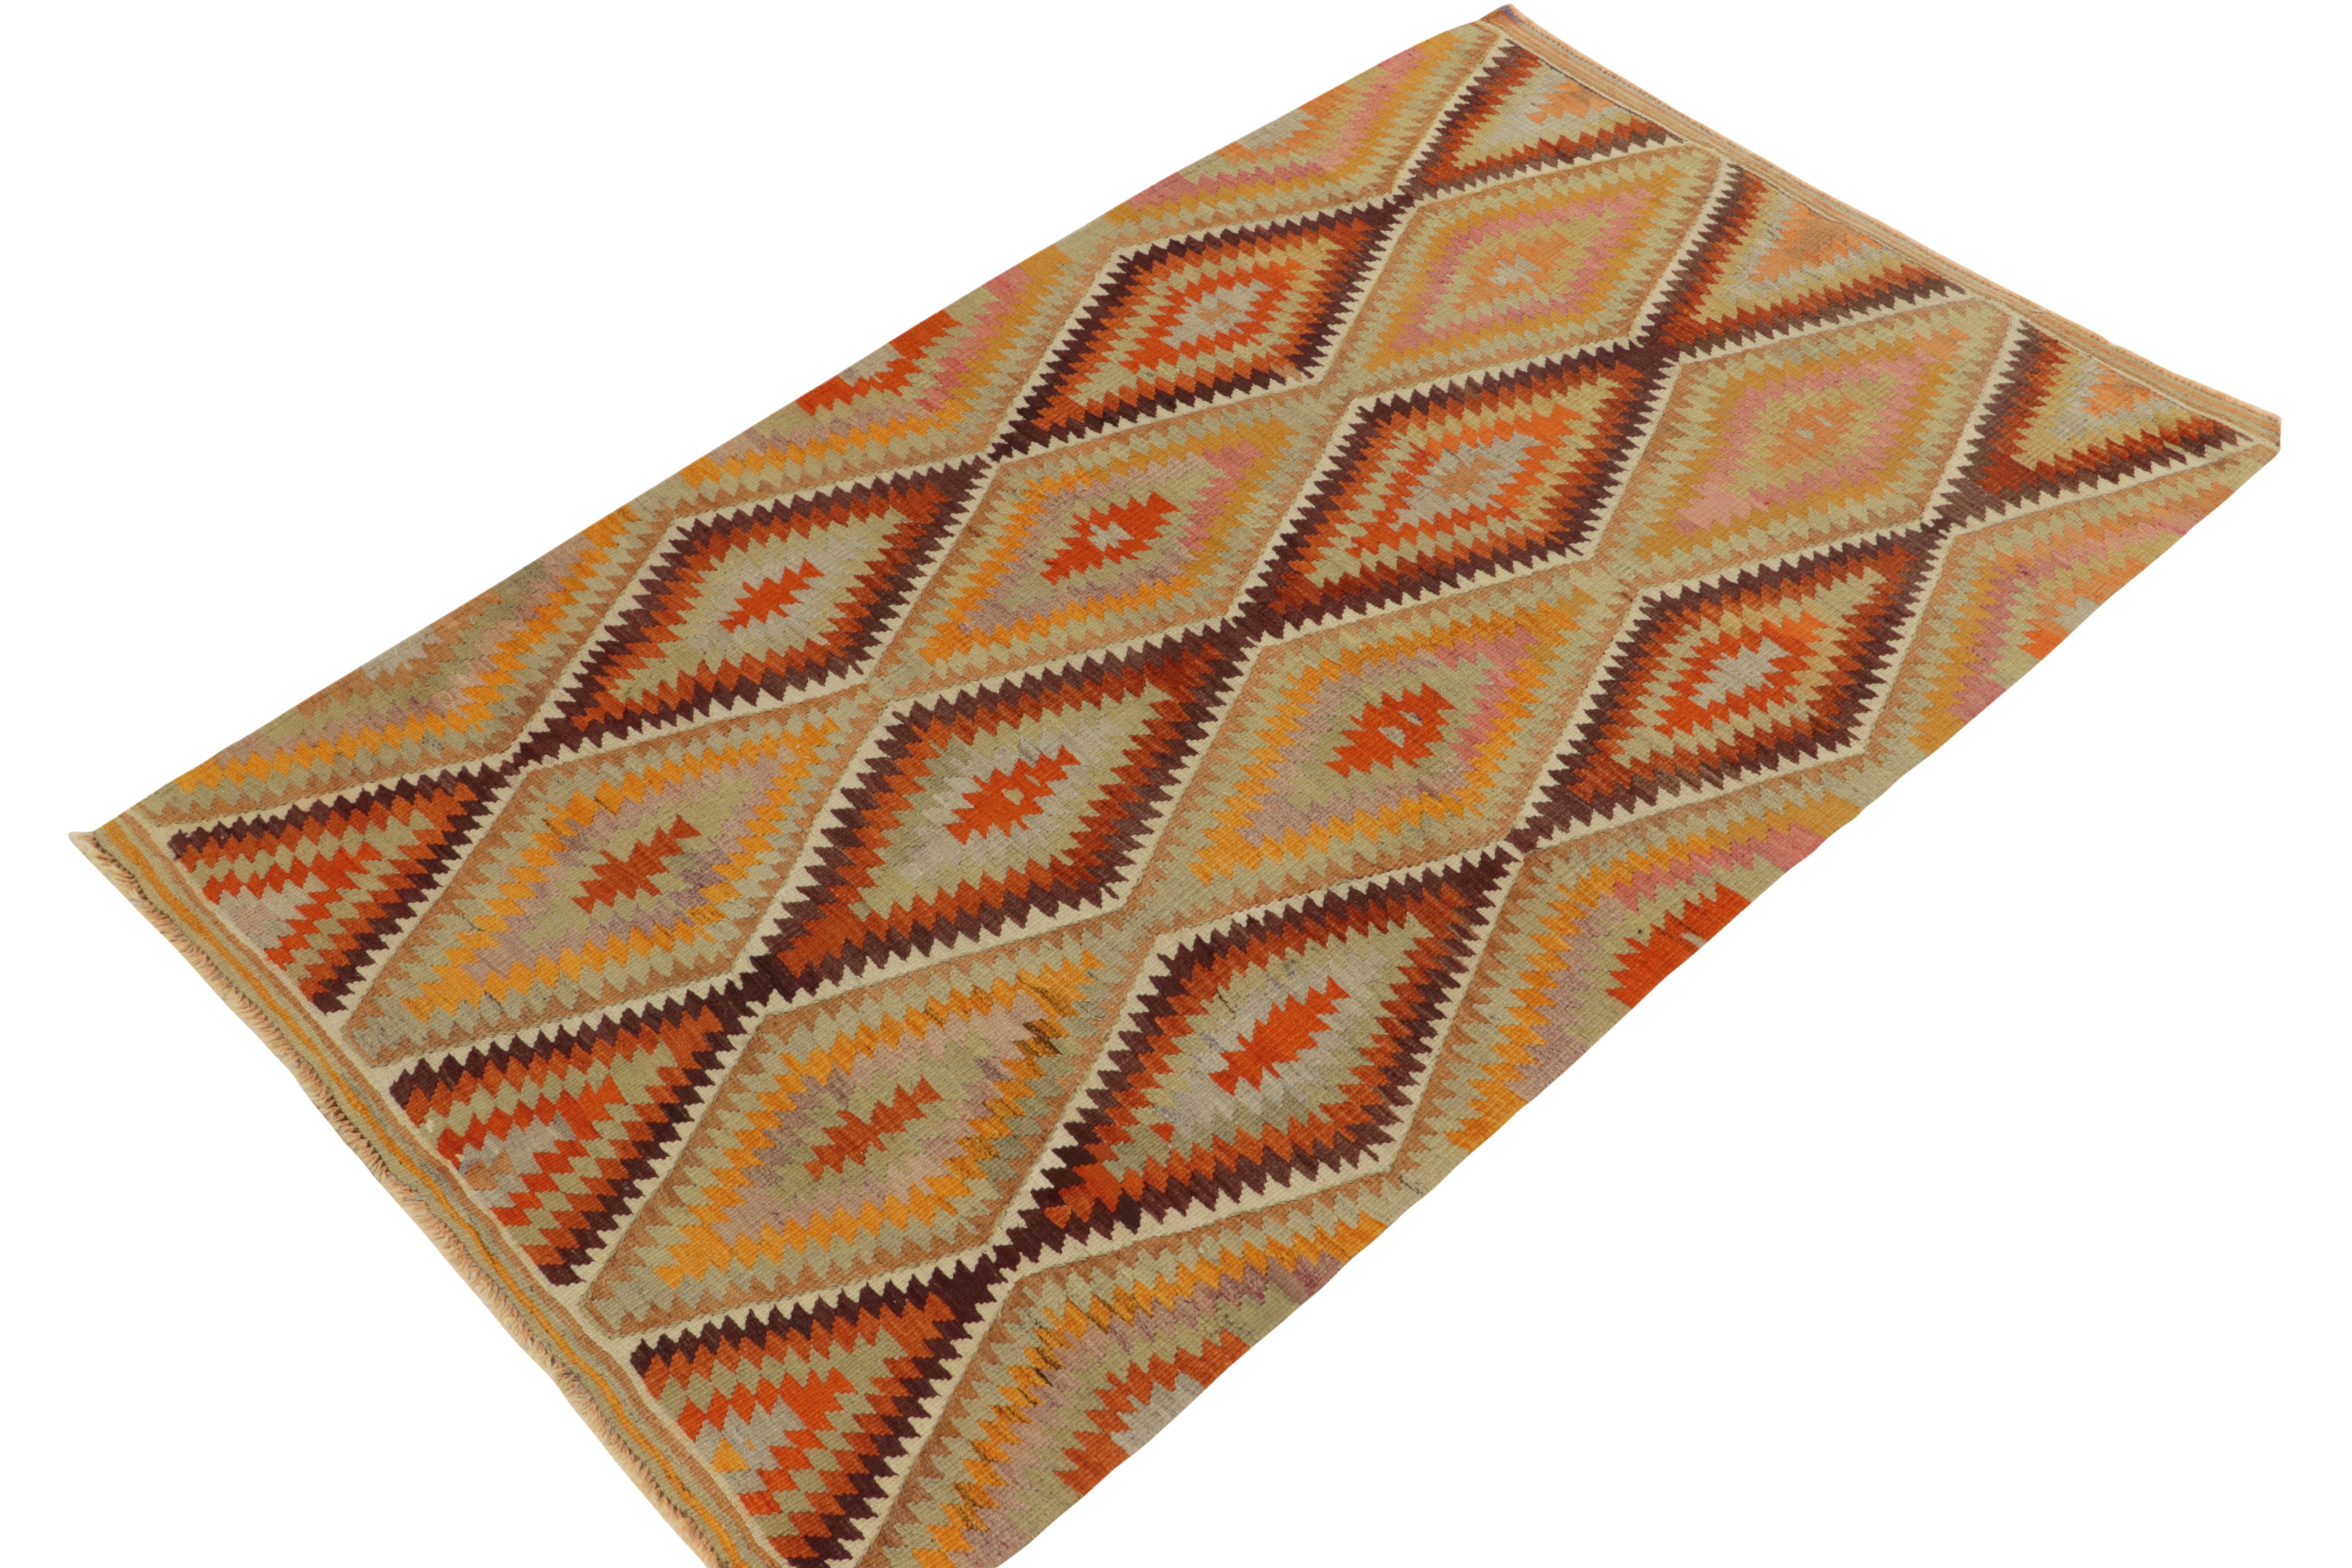 Originating from Turkey circa 1950-1960, a 5x7 vintage Turkish kilim rug exemplifying mid-century tribal sensibilities. 

Handwoven in wool, the sharp geometric pattern revels in warm orange & gold tones sitting beautifully with pastel pink & teal